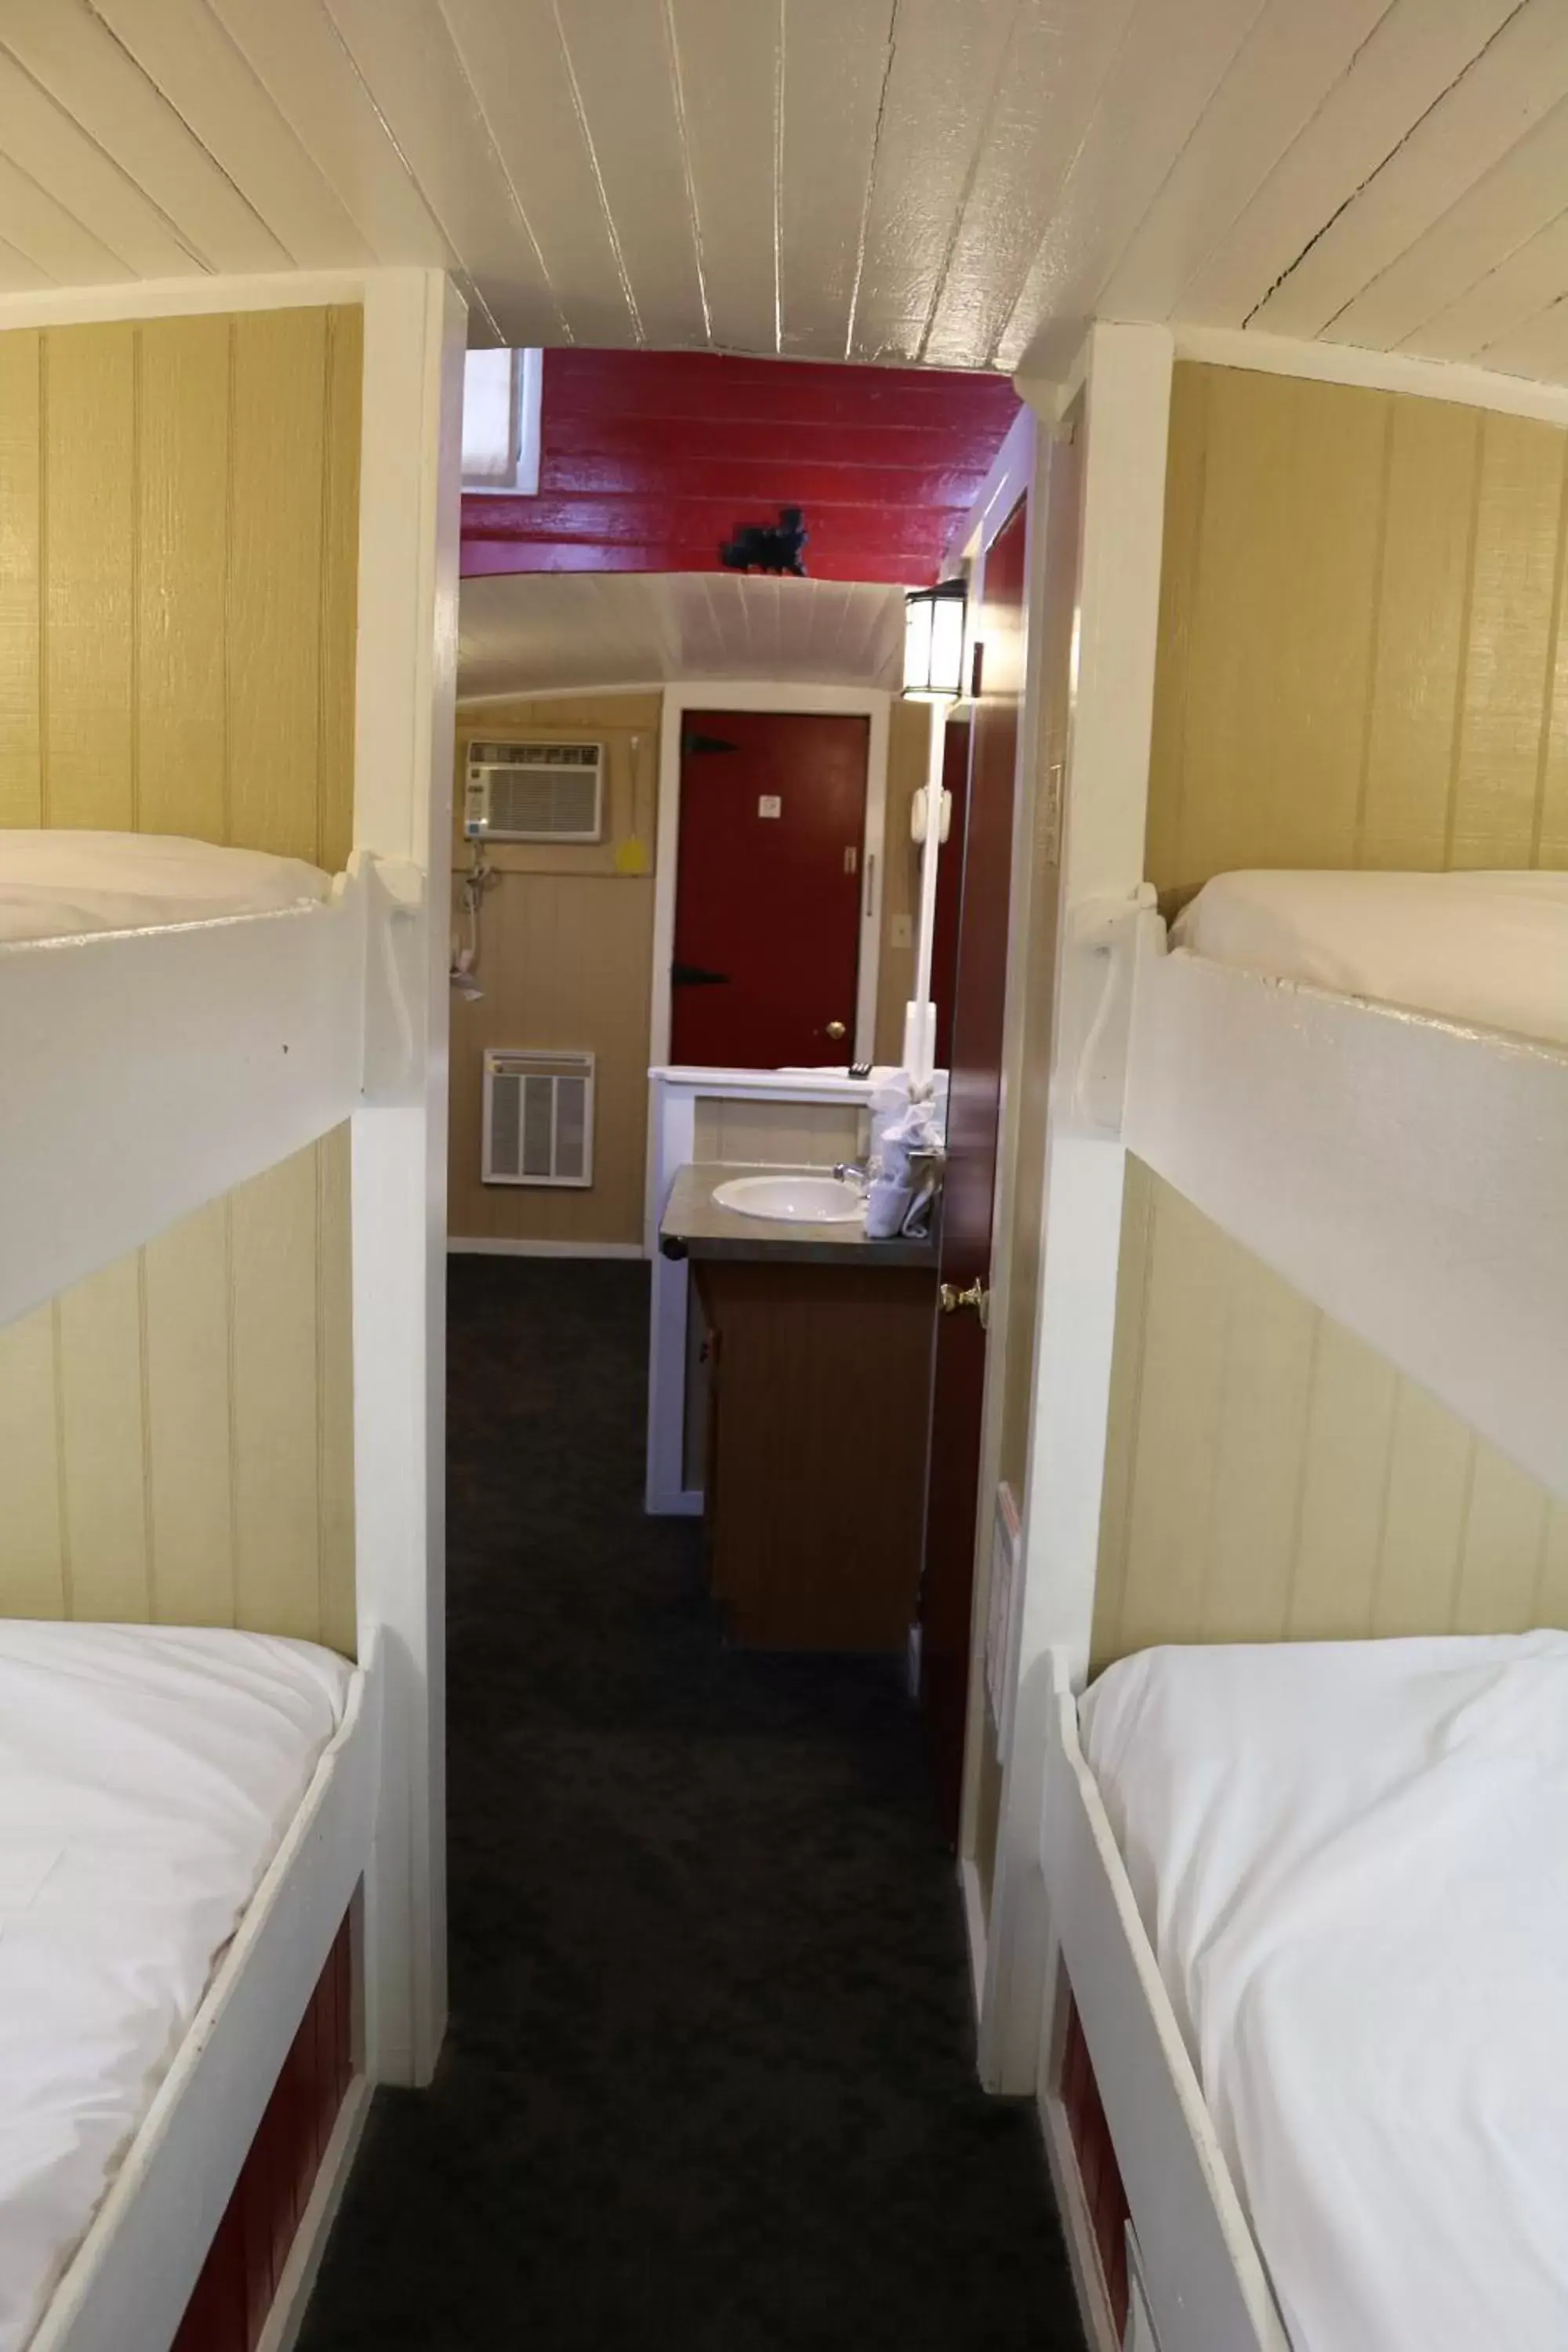 Bunk Bed in Red Caboose Motel & Restaurant